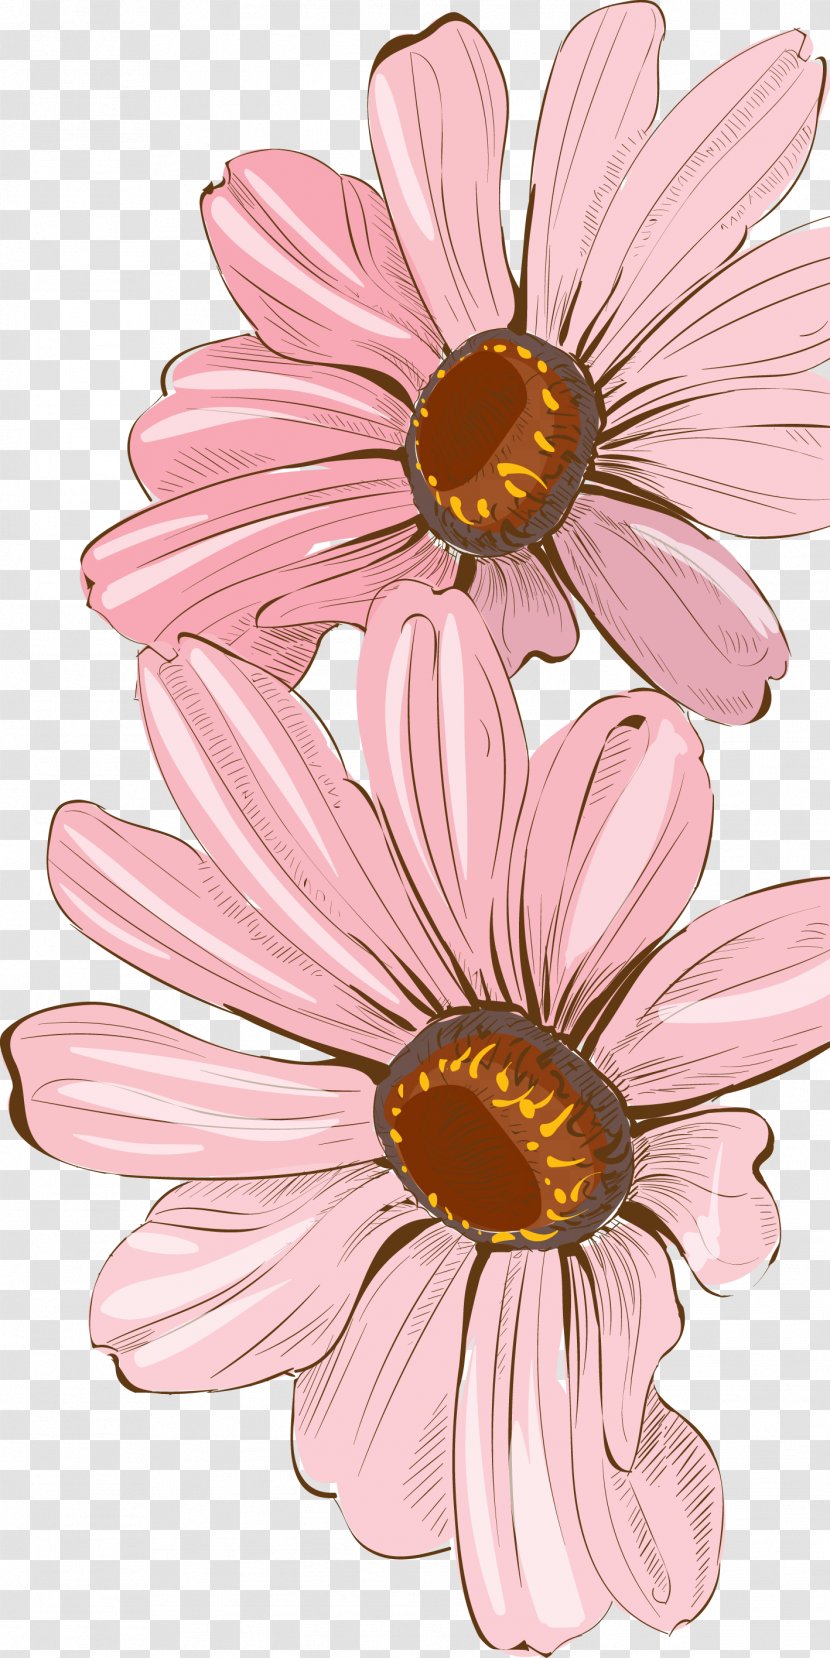 Drawing Watercolor Painting Floral Design - Flowering Plant - Fresh Painted Decoration Transparent PNG